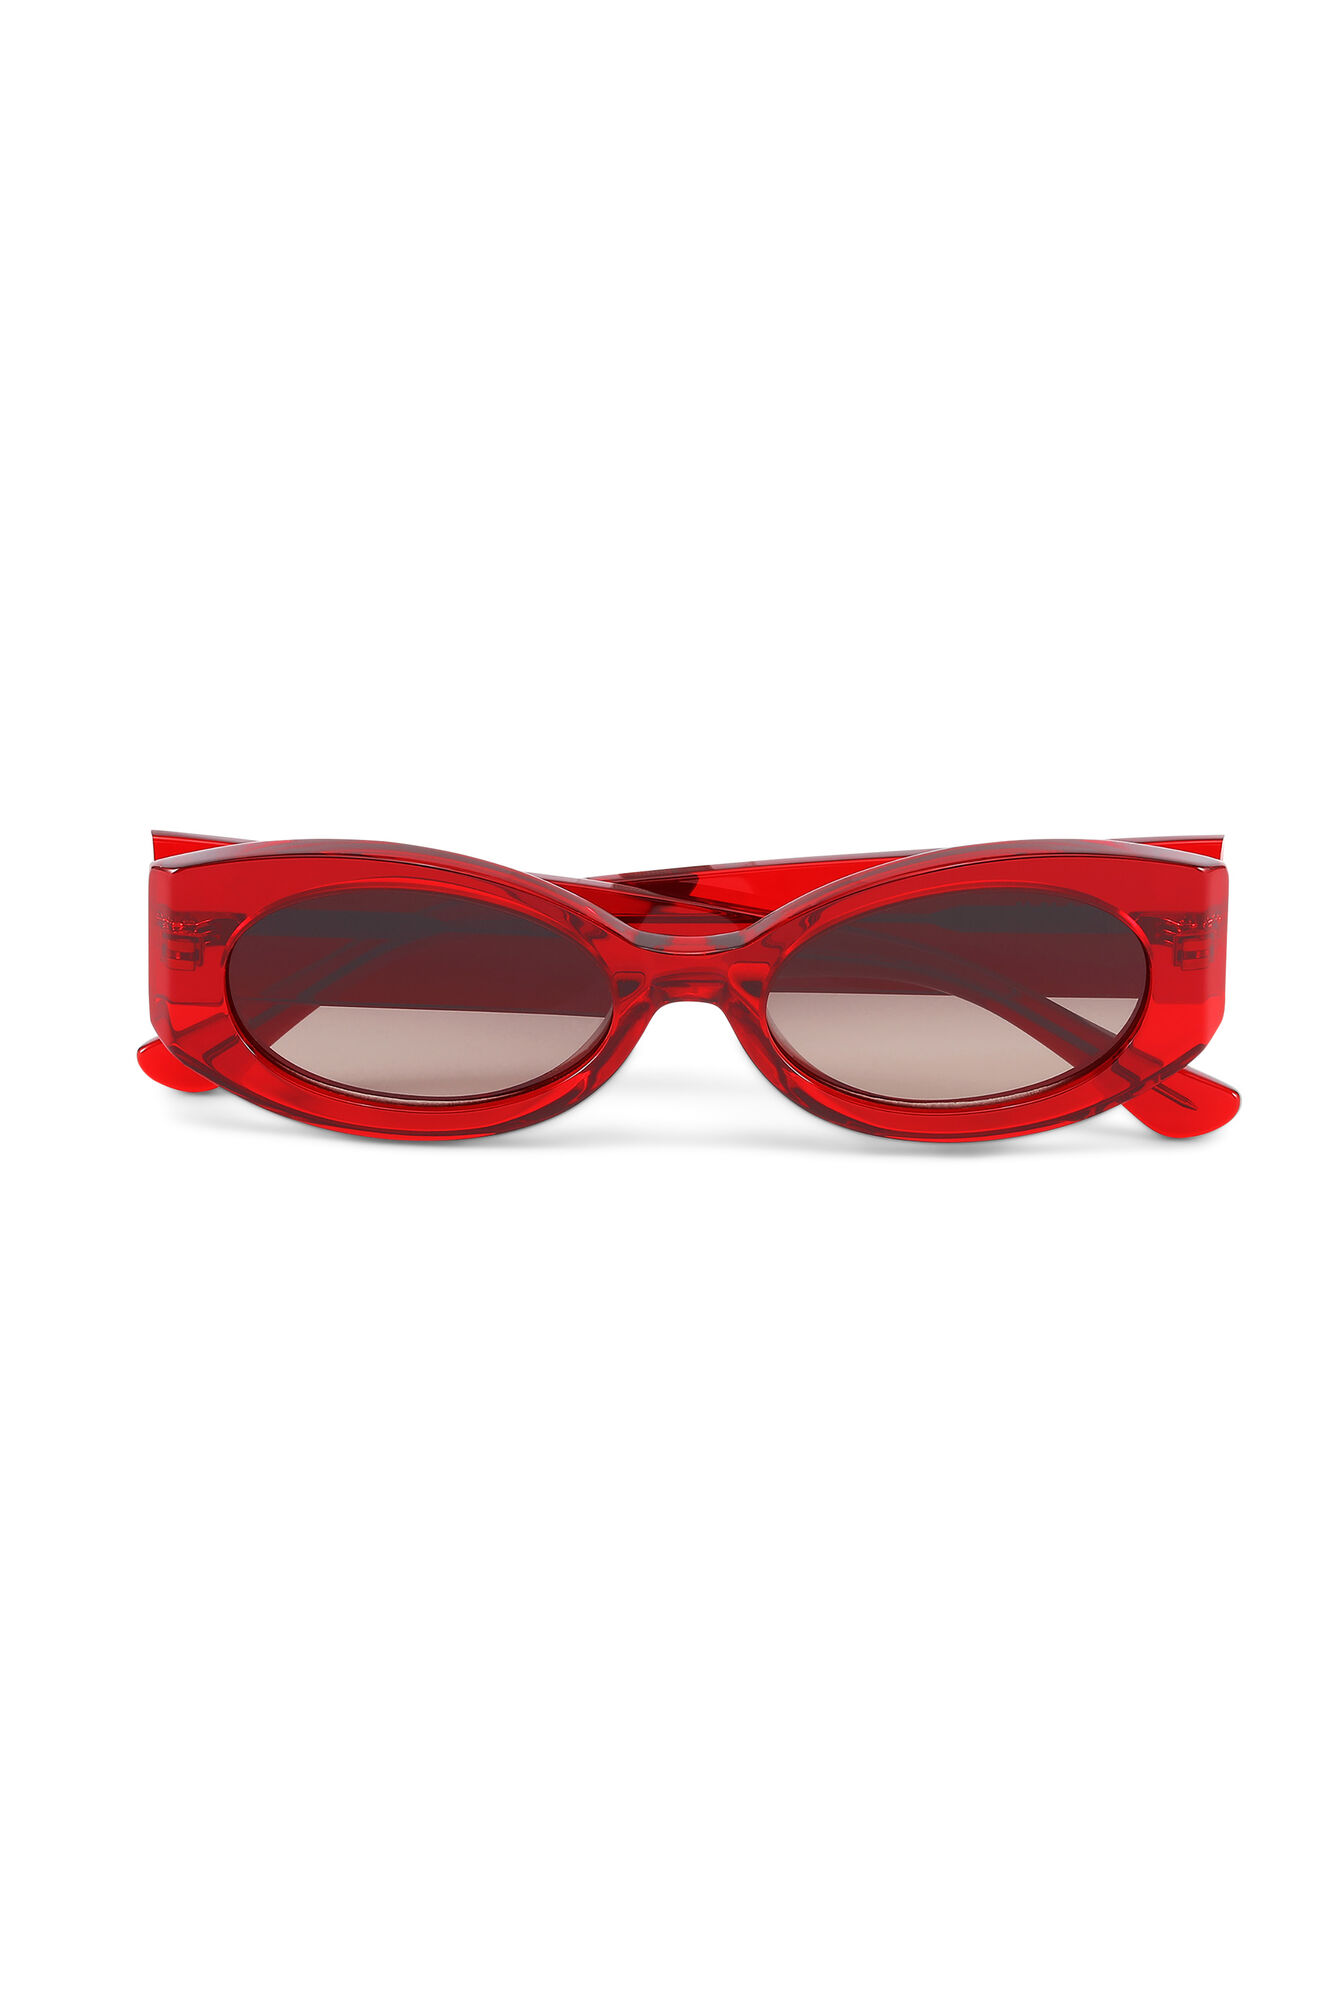 Biodegradable Acetate Oval Sunglasses, in colour High Risk Red - 1 - GANNI